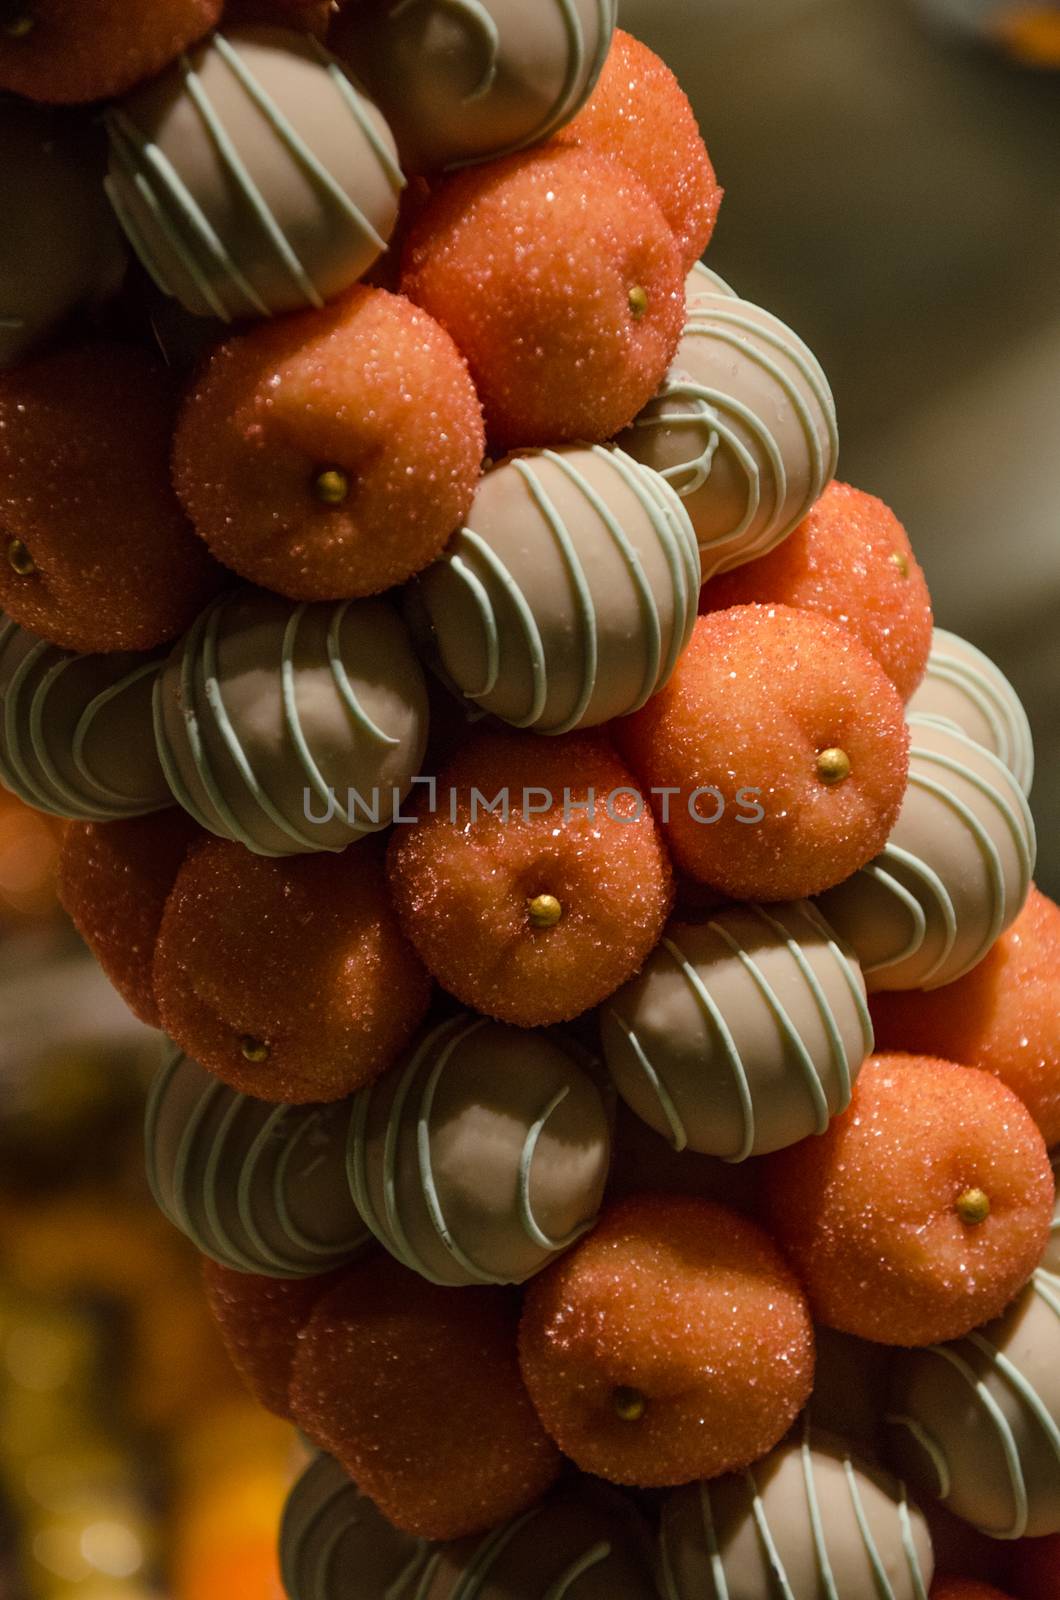 Sweets at a wedding by Peruphotoart